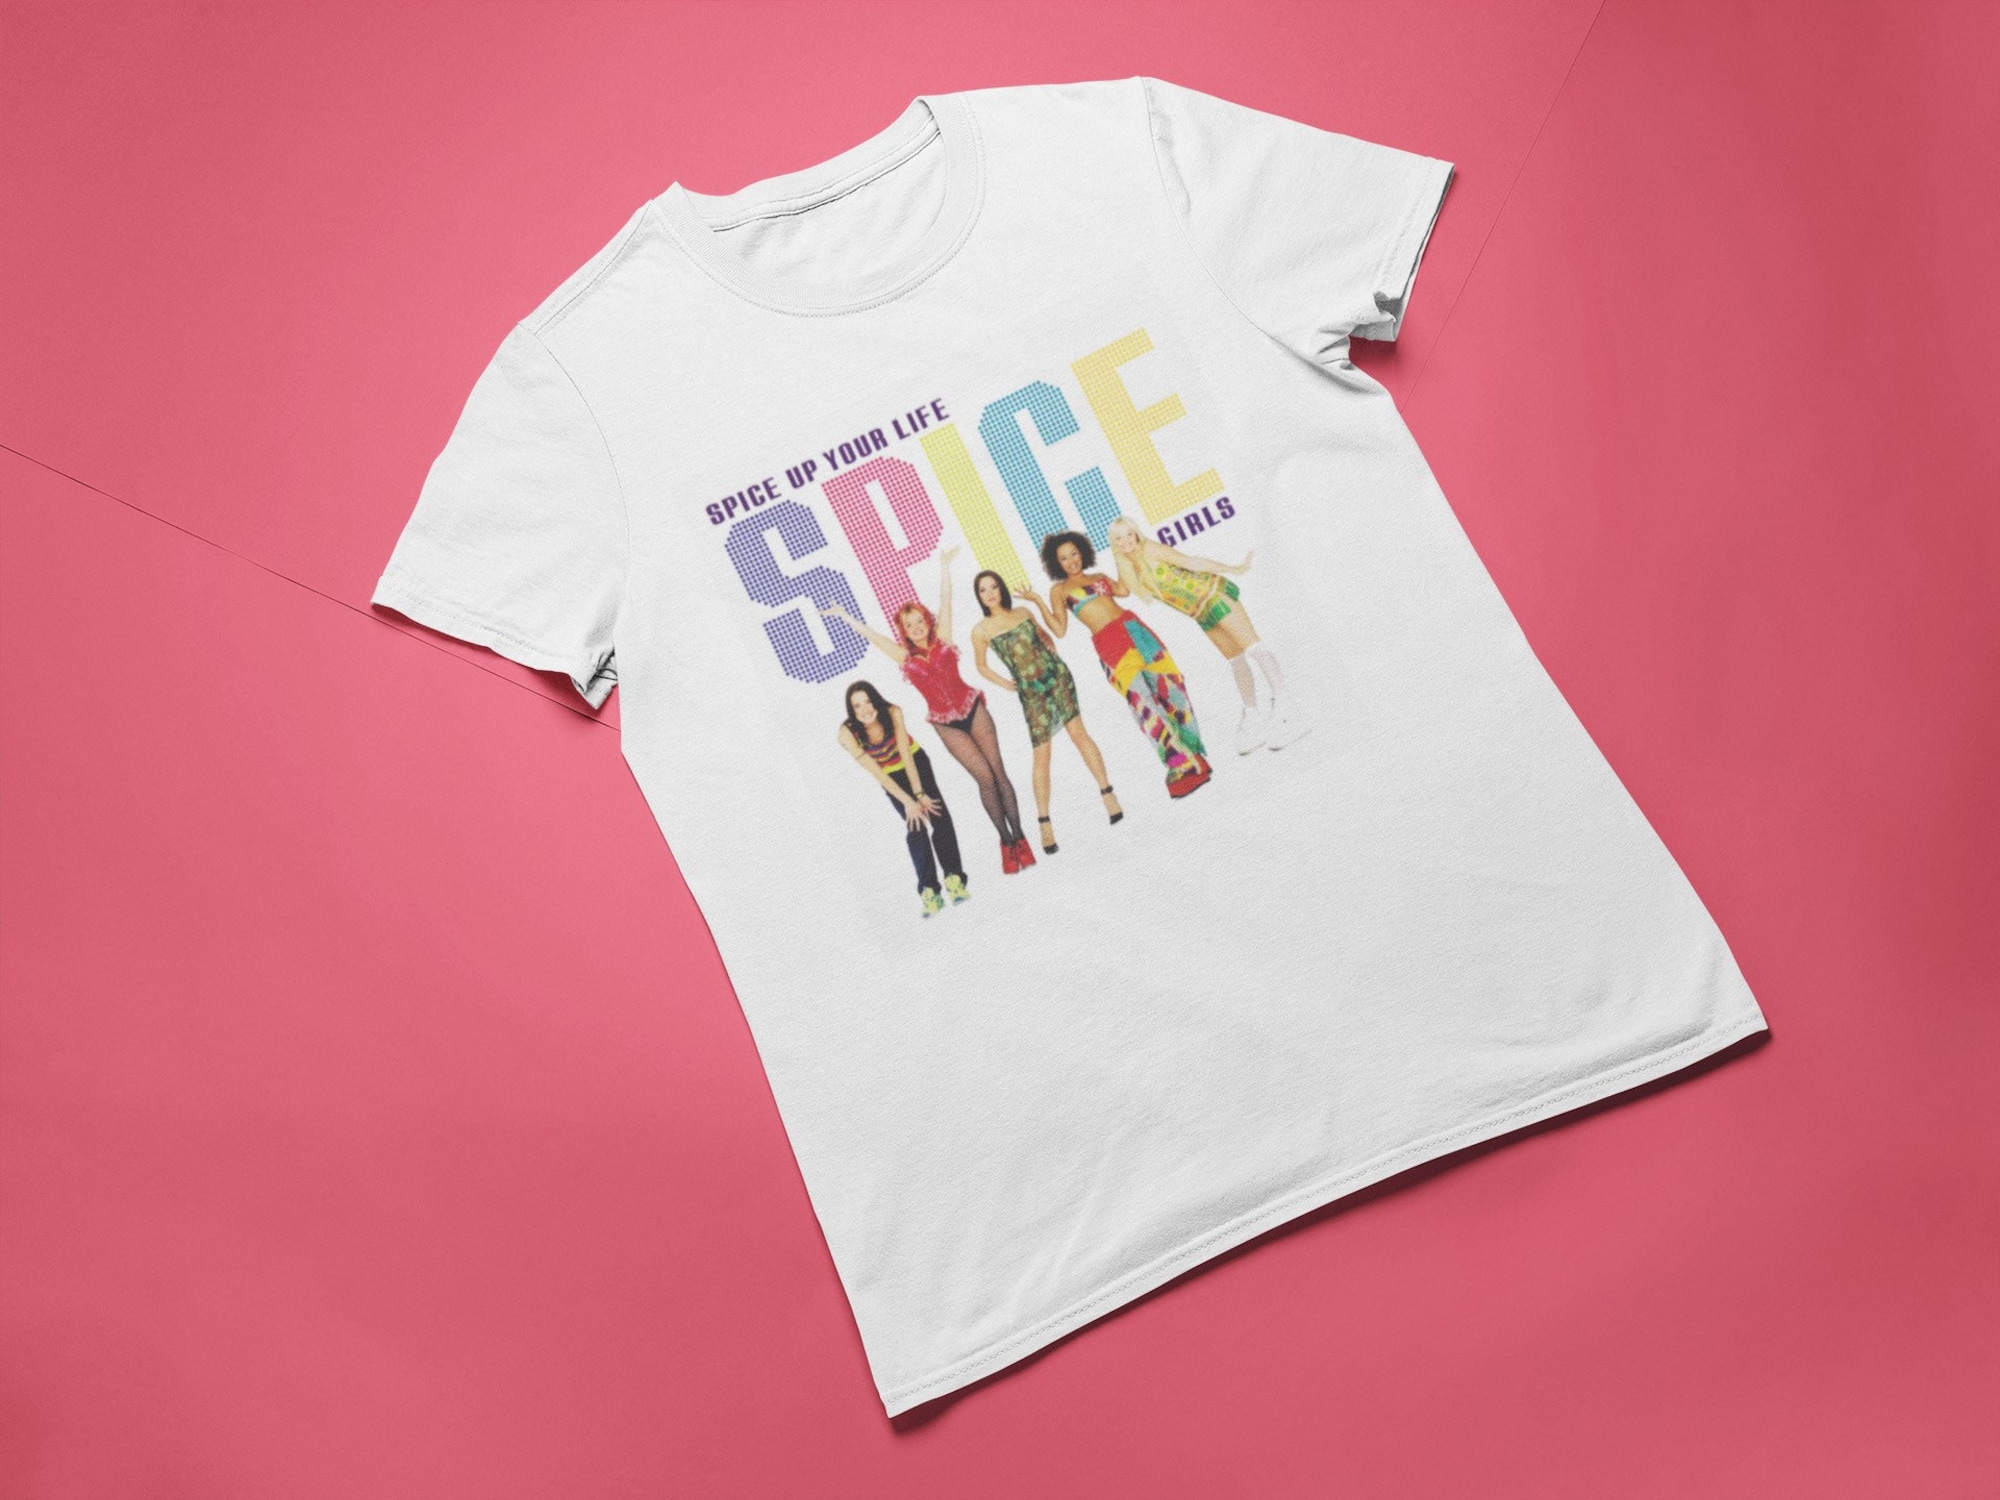 Spice Girls Spice Up Your Life White Short Sleeved T-Shirt